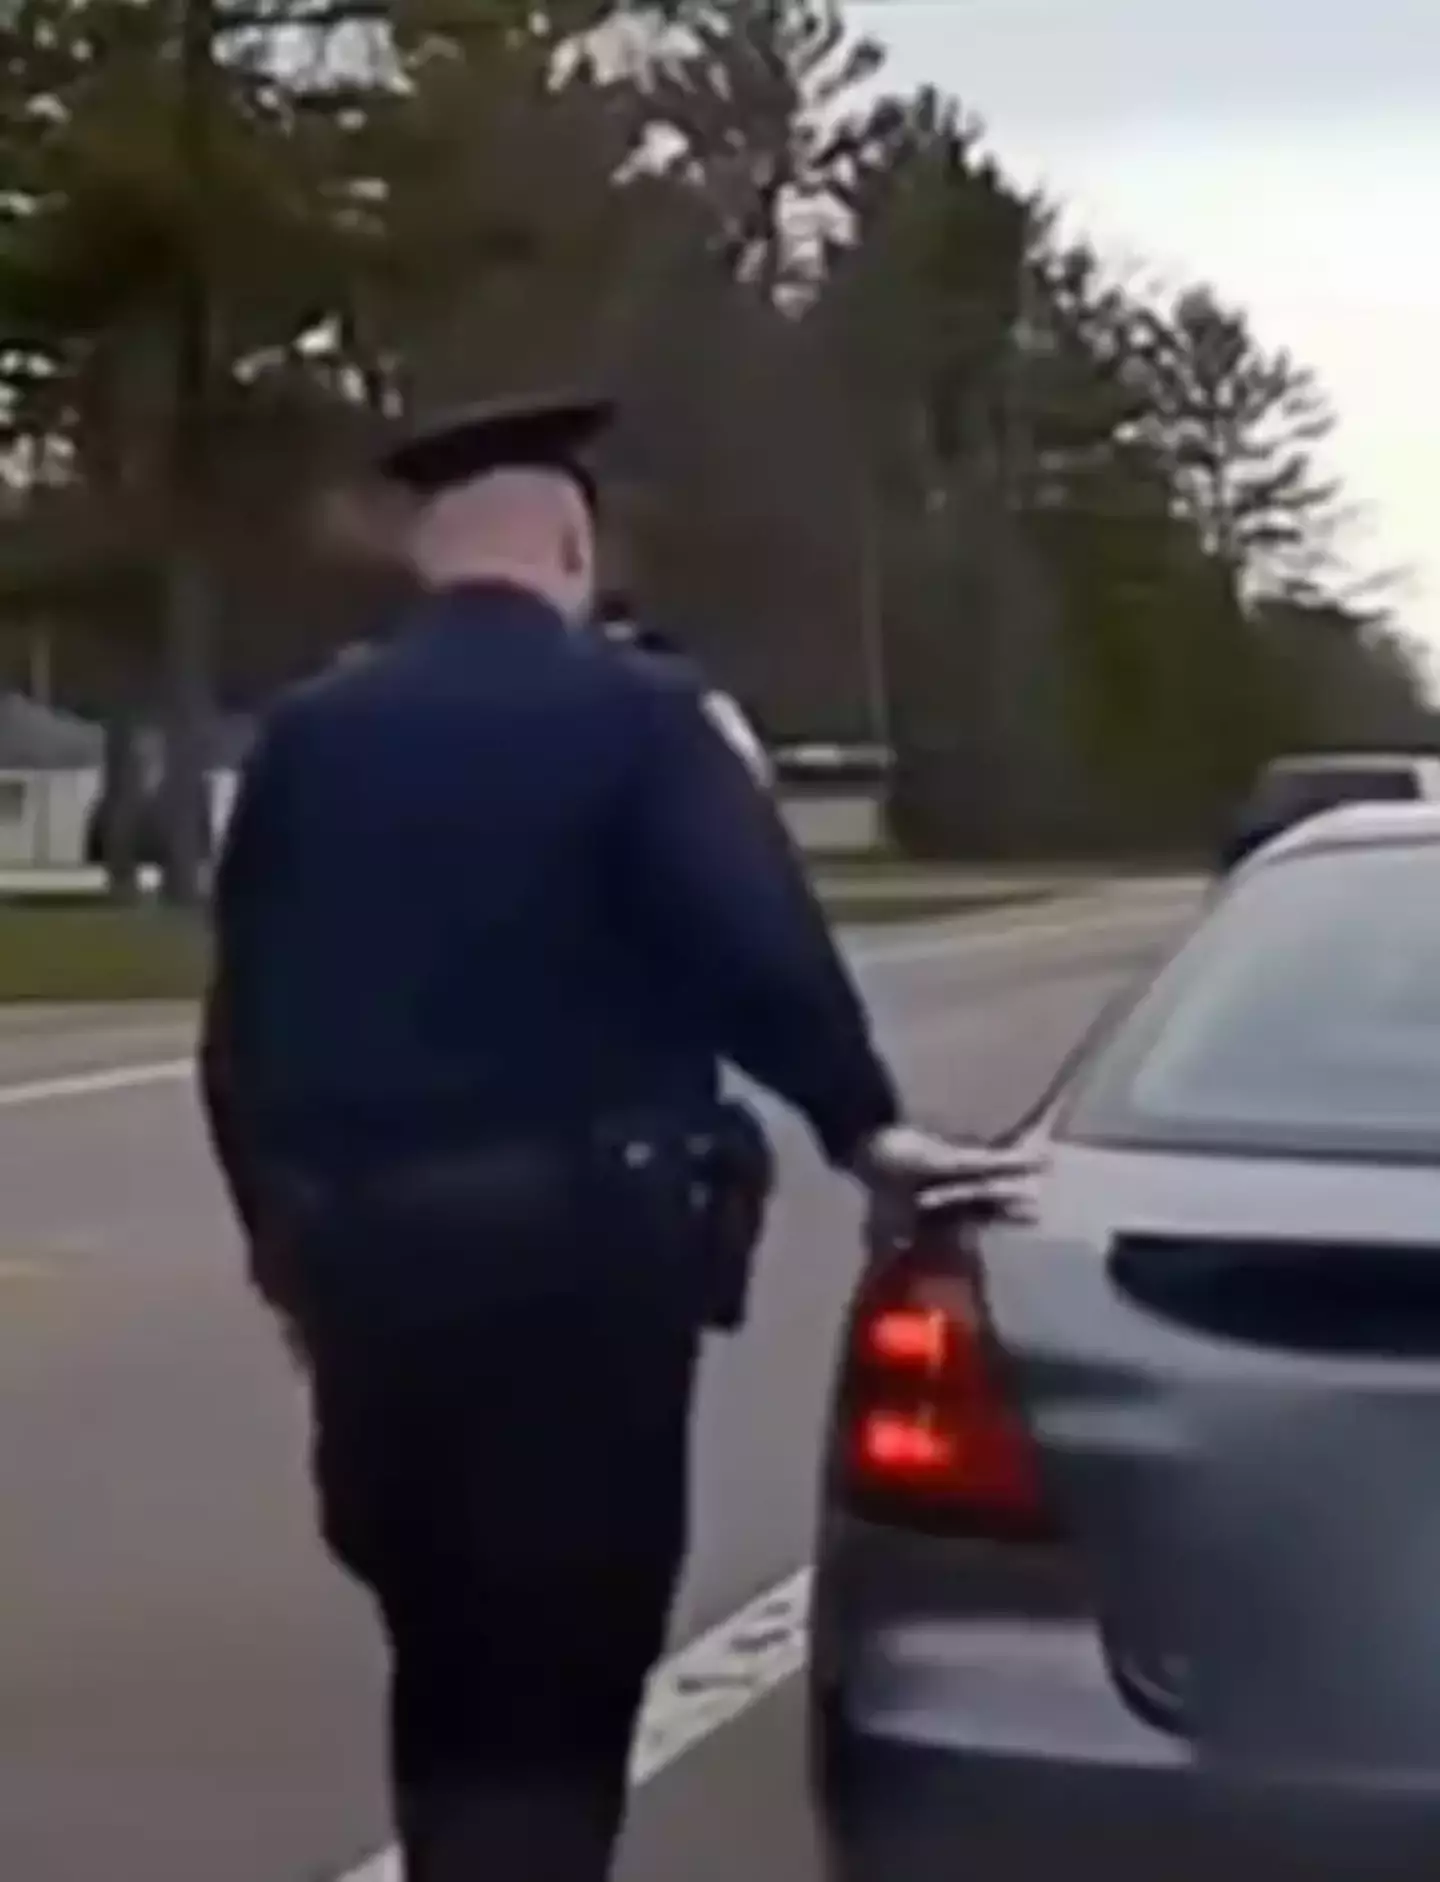 The police have a reason for touching the back of a car.